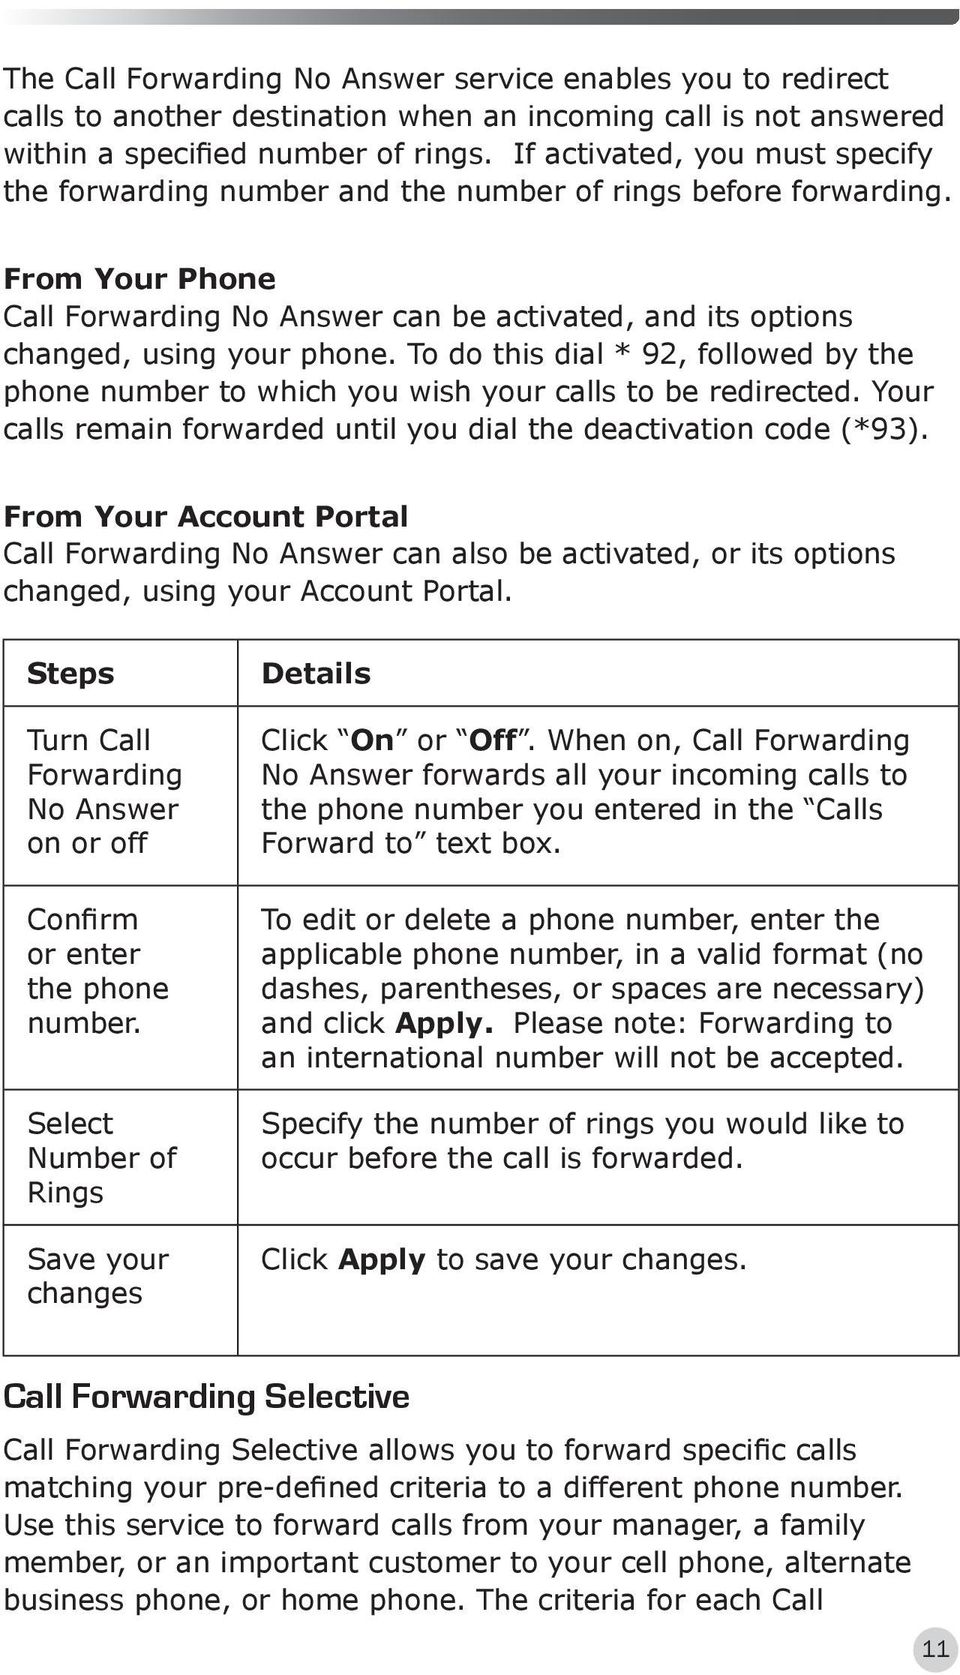 To do this dial * 92, followed by the phone number to which you wish your calls to be redirected. Your calls remain forwarded until you dial the deactivation code (*93).